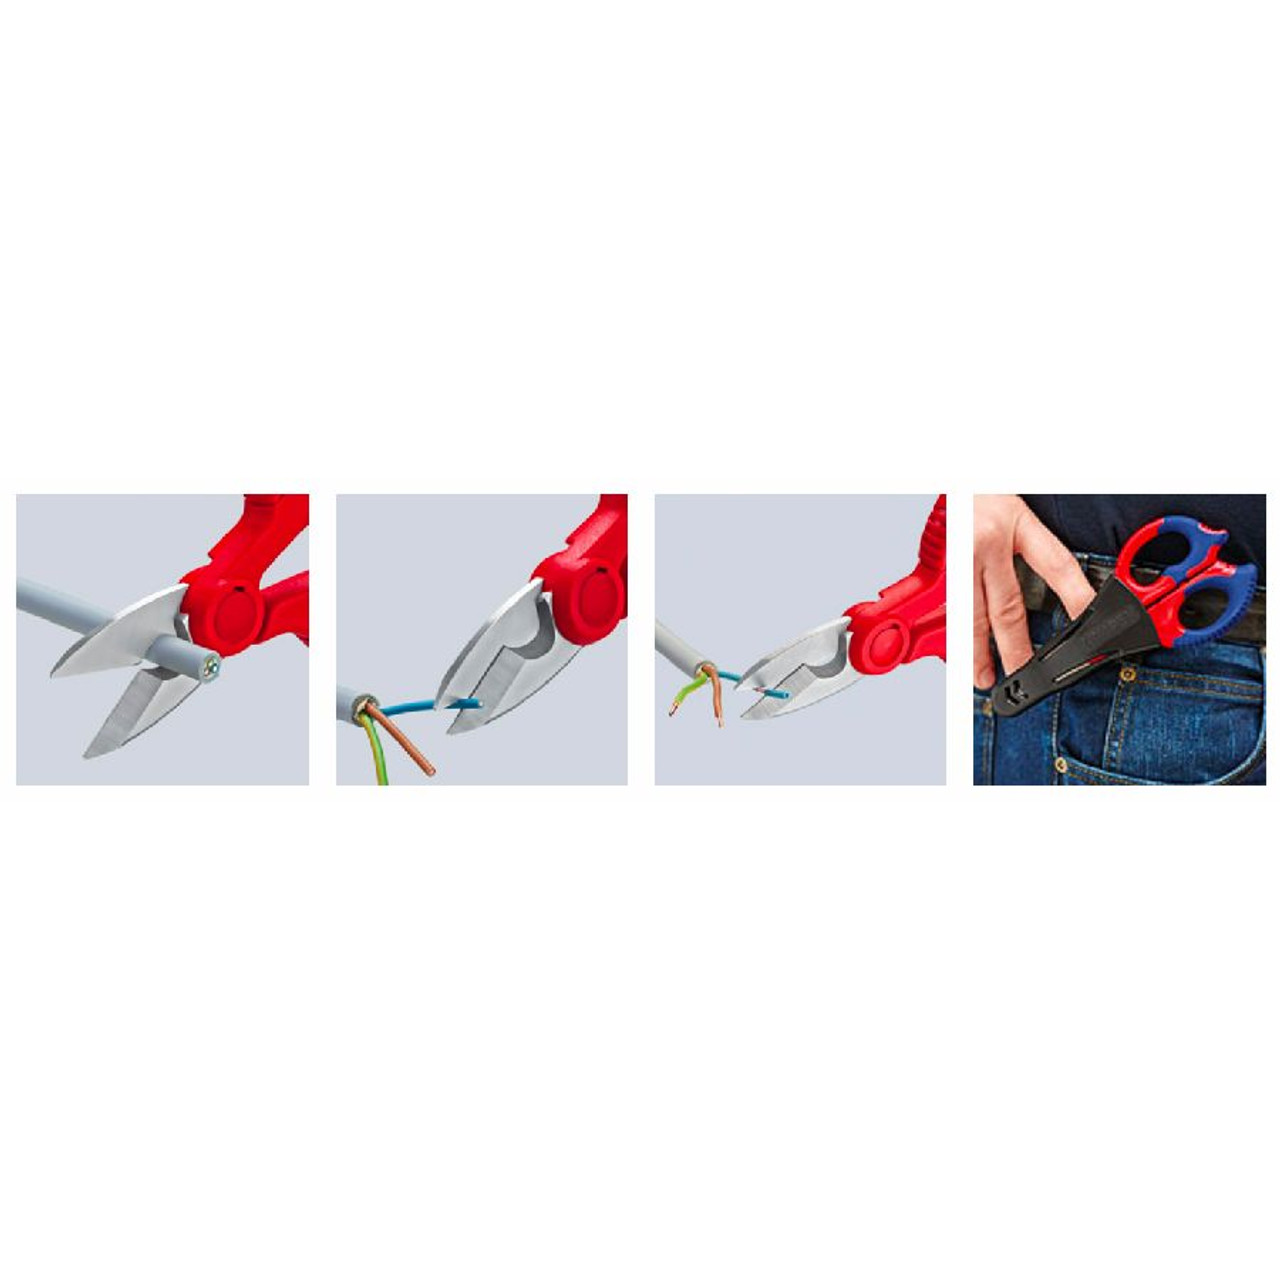 Knipex Electrician's Shears (95 05 155)